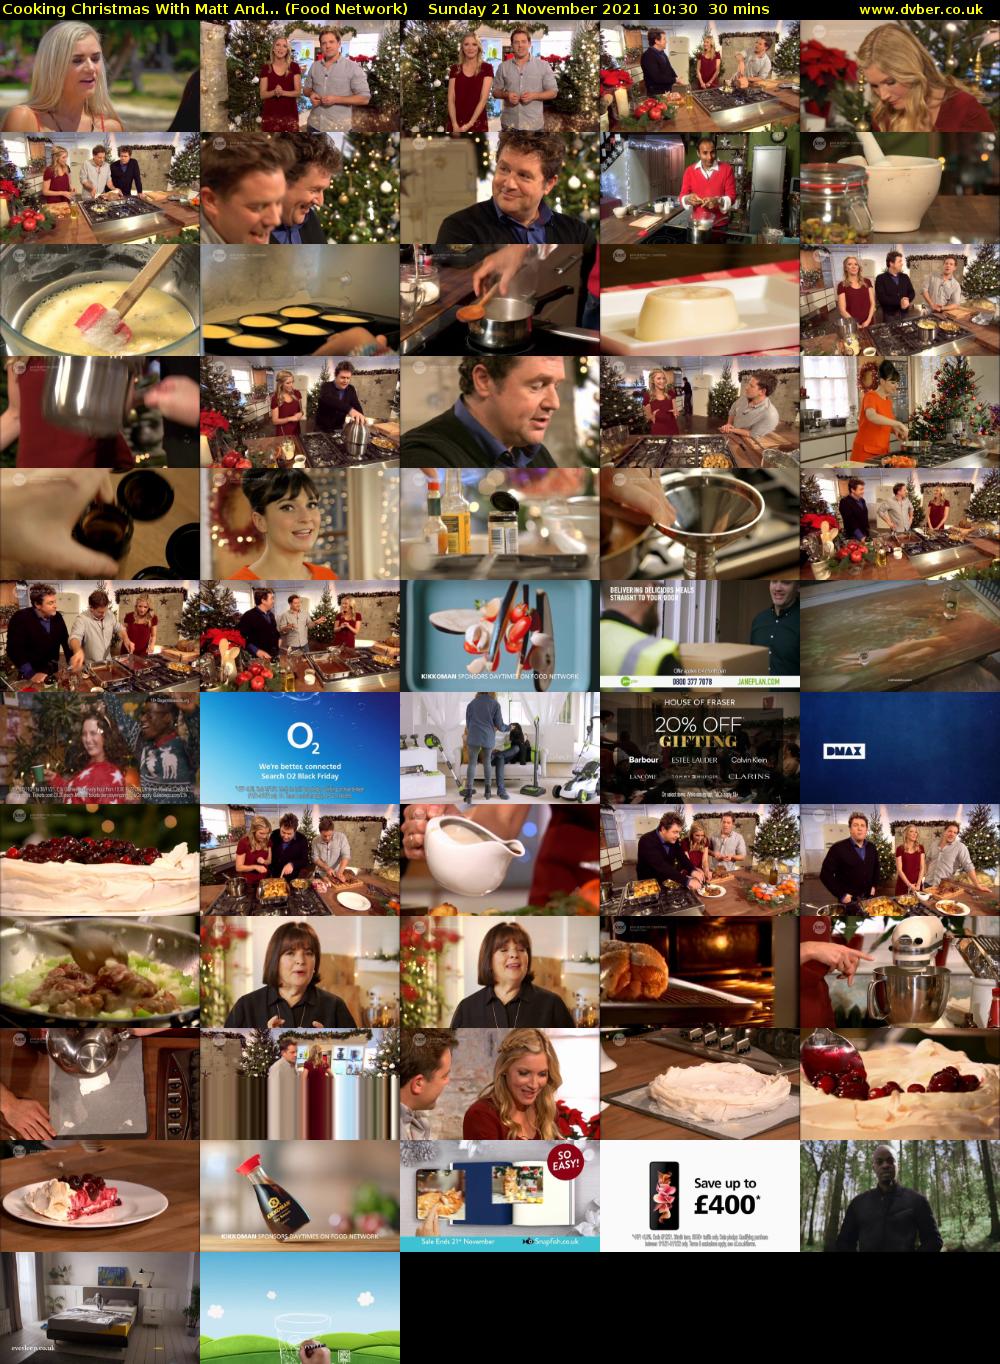 Cooking Christmas With Matt And... (Food Network) Sunday 21 November 2021 10:30 - 11:00